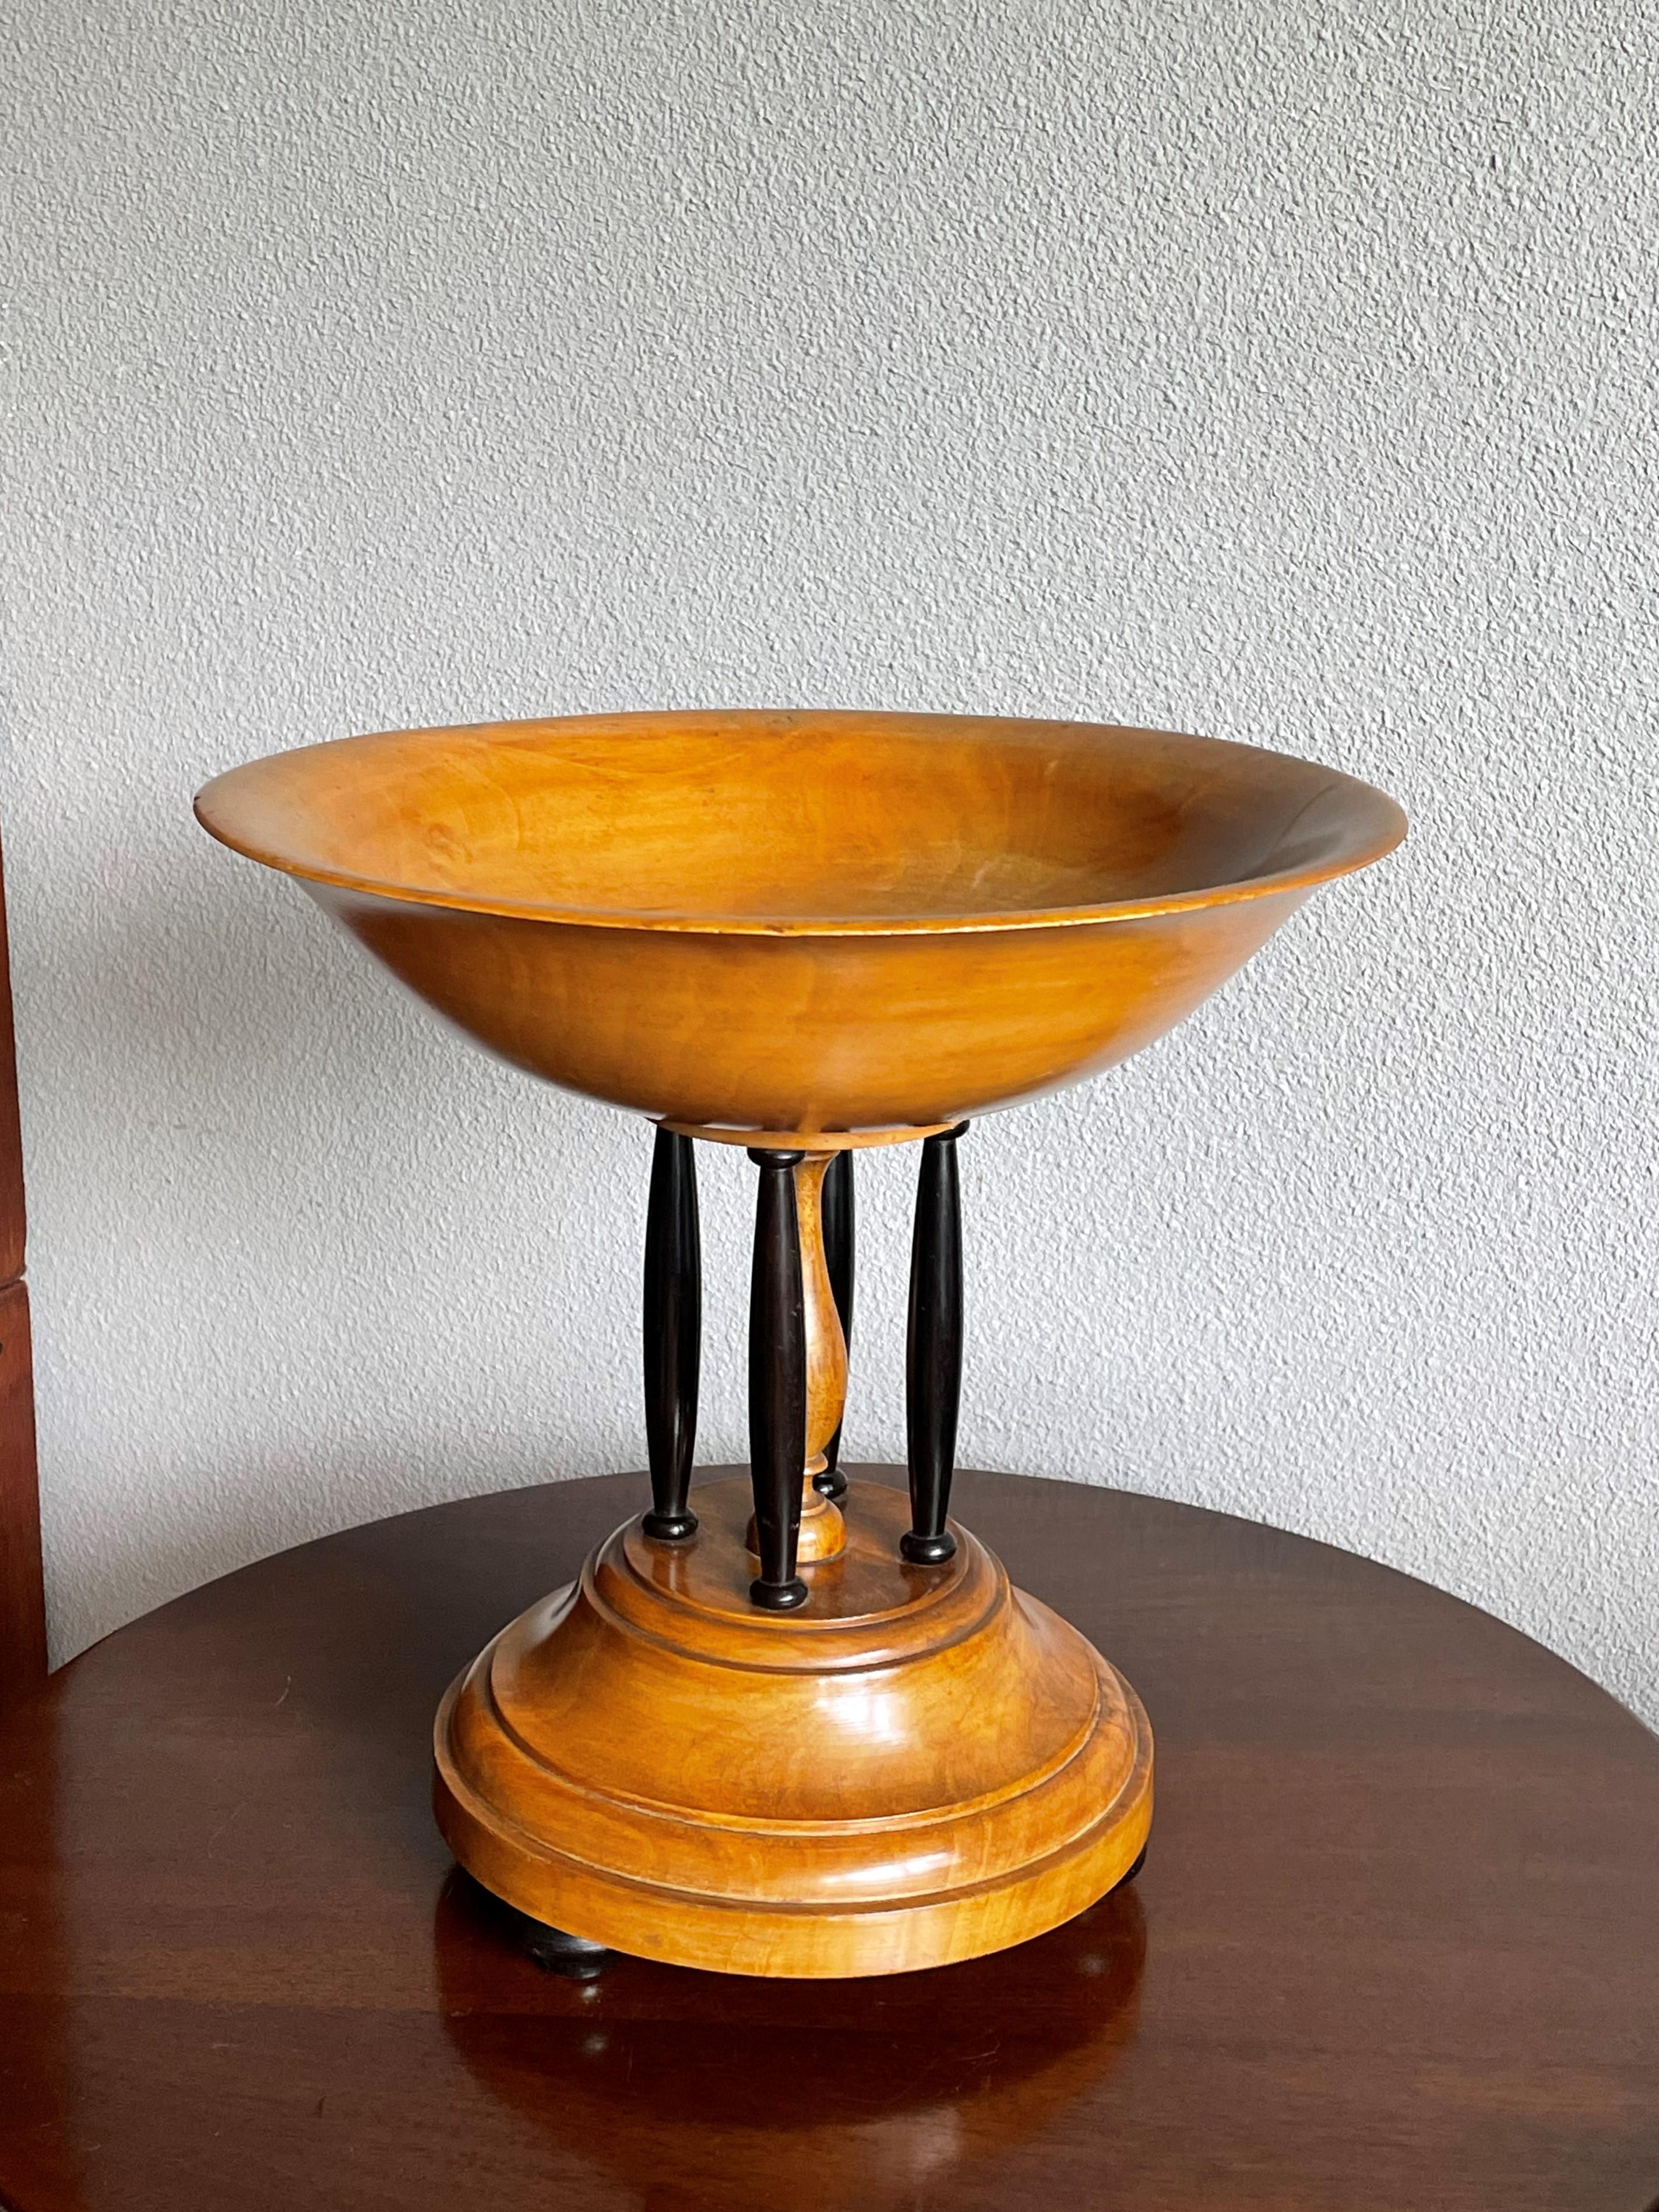 Very rare and easthetically pleasing antique wooden presentation piece.

We find it incredible that a piece that looks as fragile as this 19th century fruitbowl still is in such wonderful condition. In one spot inside the handcrafted wooden bowl it